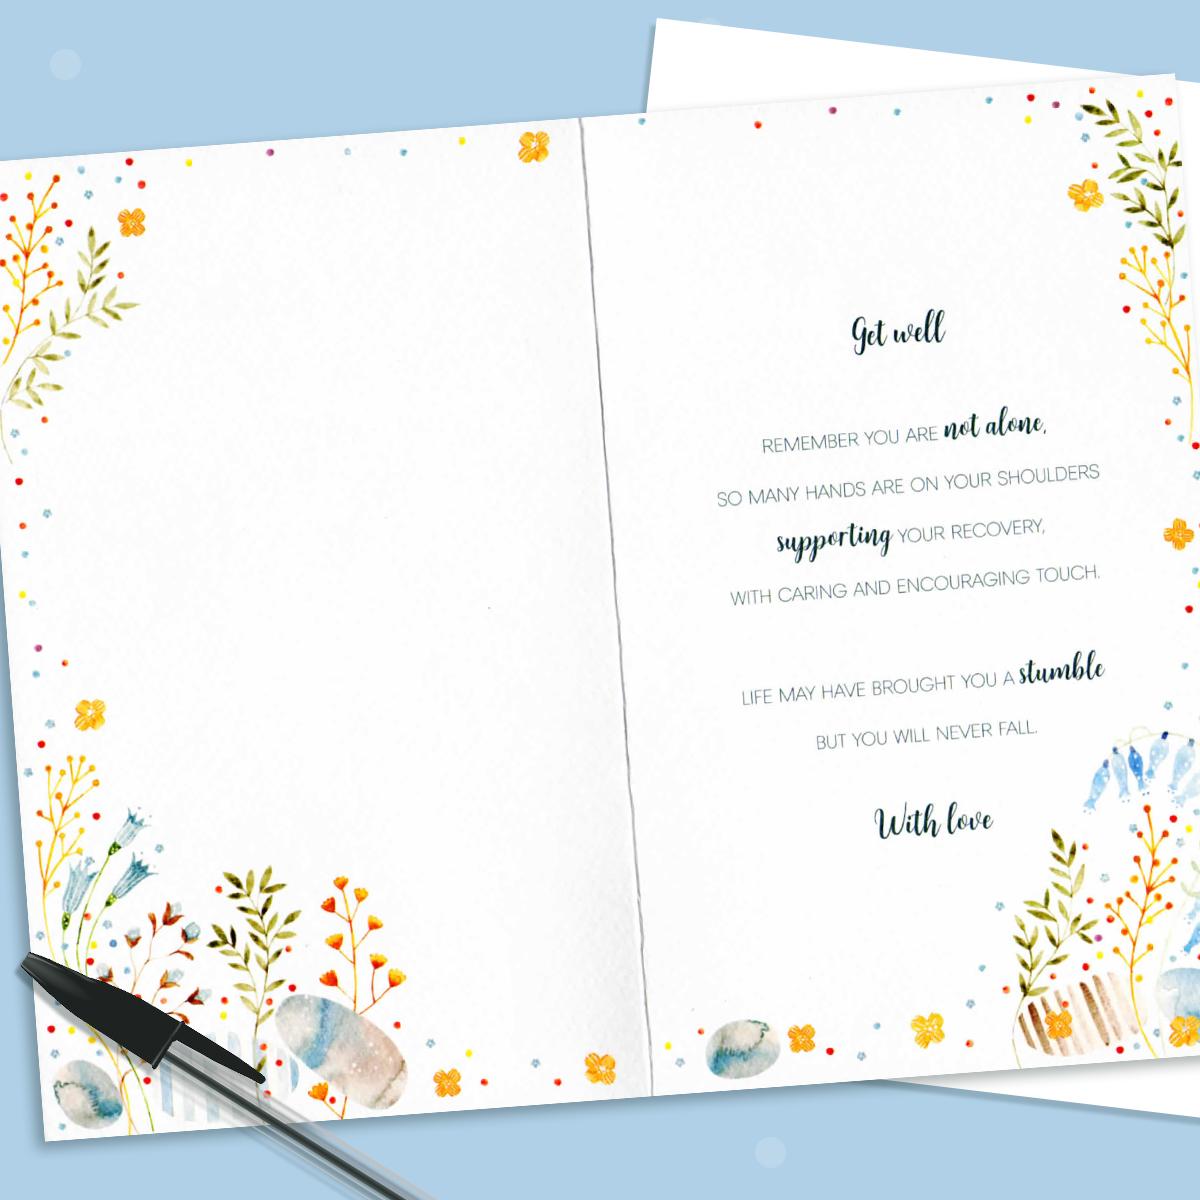 Get Well Soon Card Showing Inside Image Of Layout And Printed Text